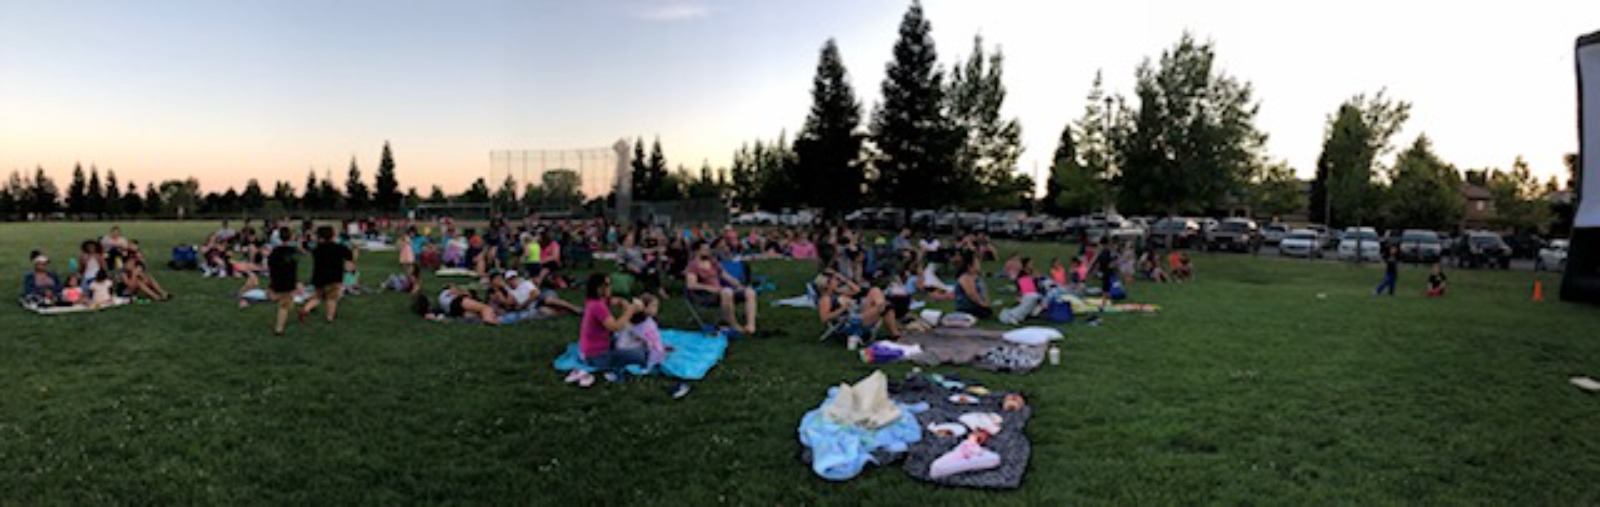 people in park for movie night